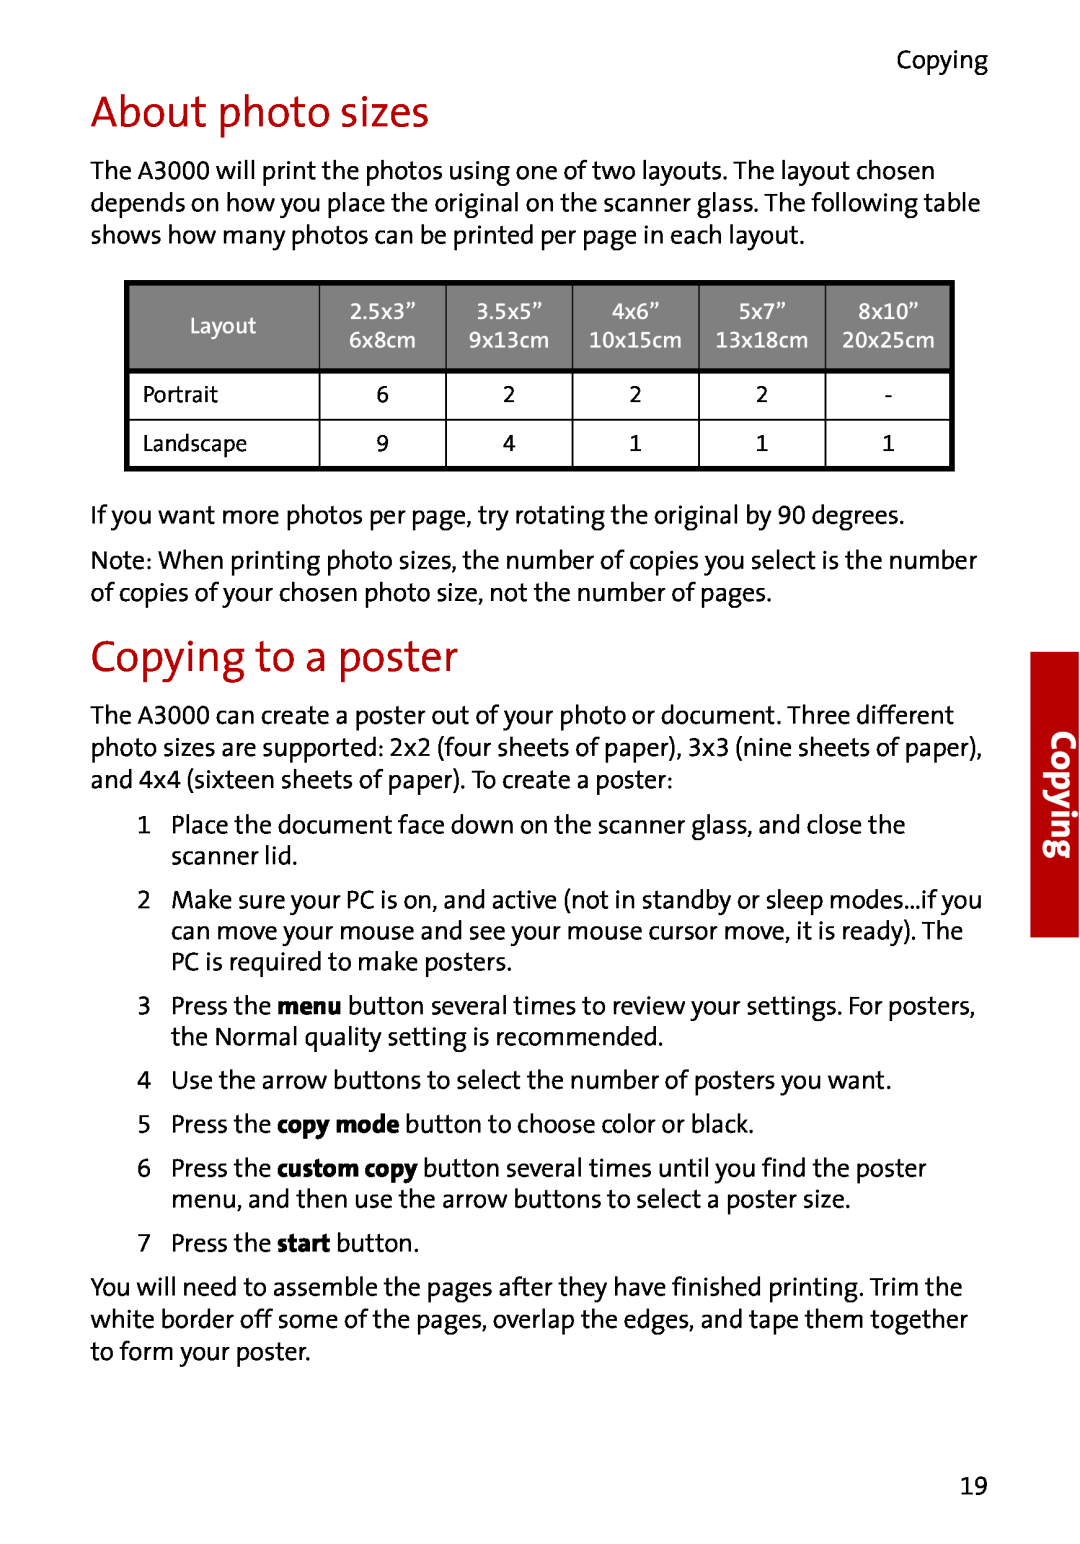 Compaq A3000 manual About photo sizes, Copying to a poster, Layout, 2.5x3”, 3.5x5”, 4x6”, 5x7”, 8x10” 